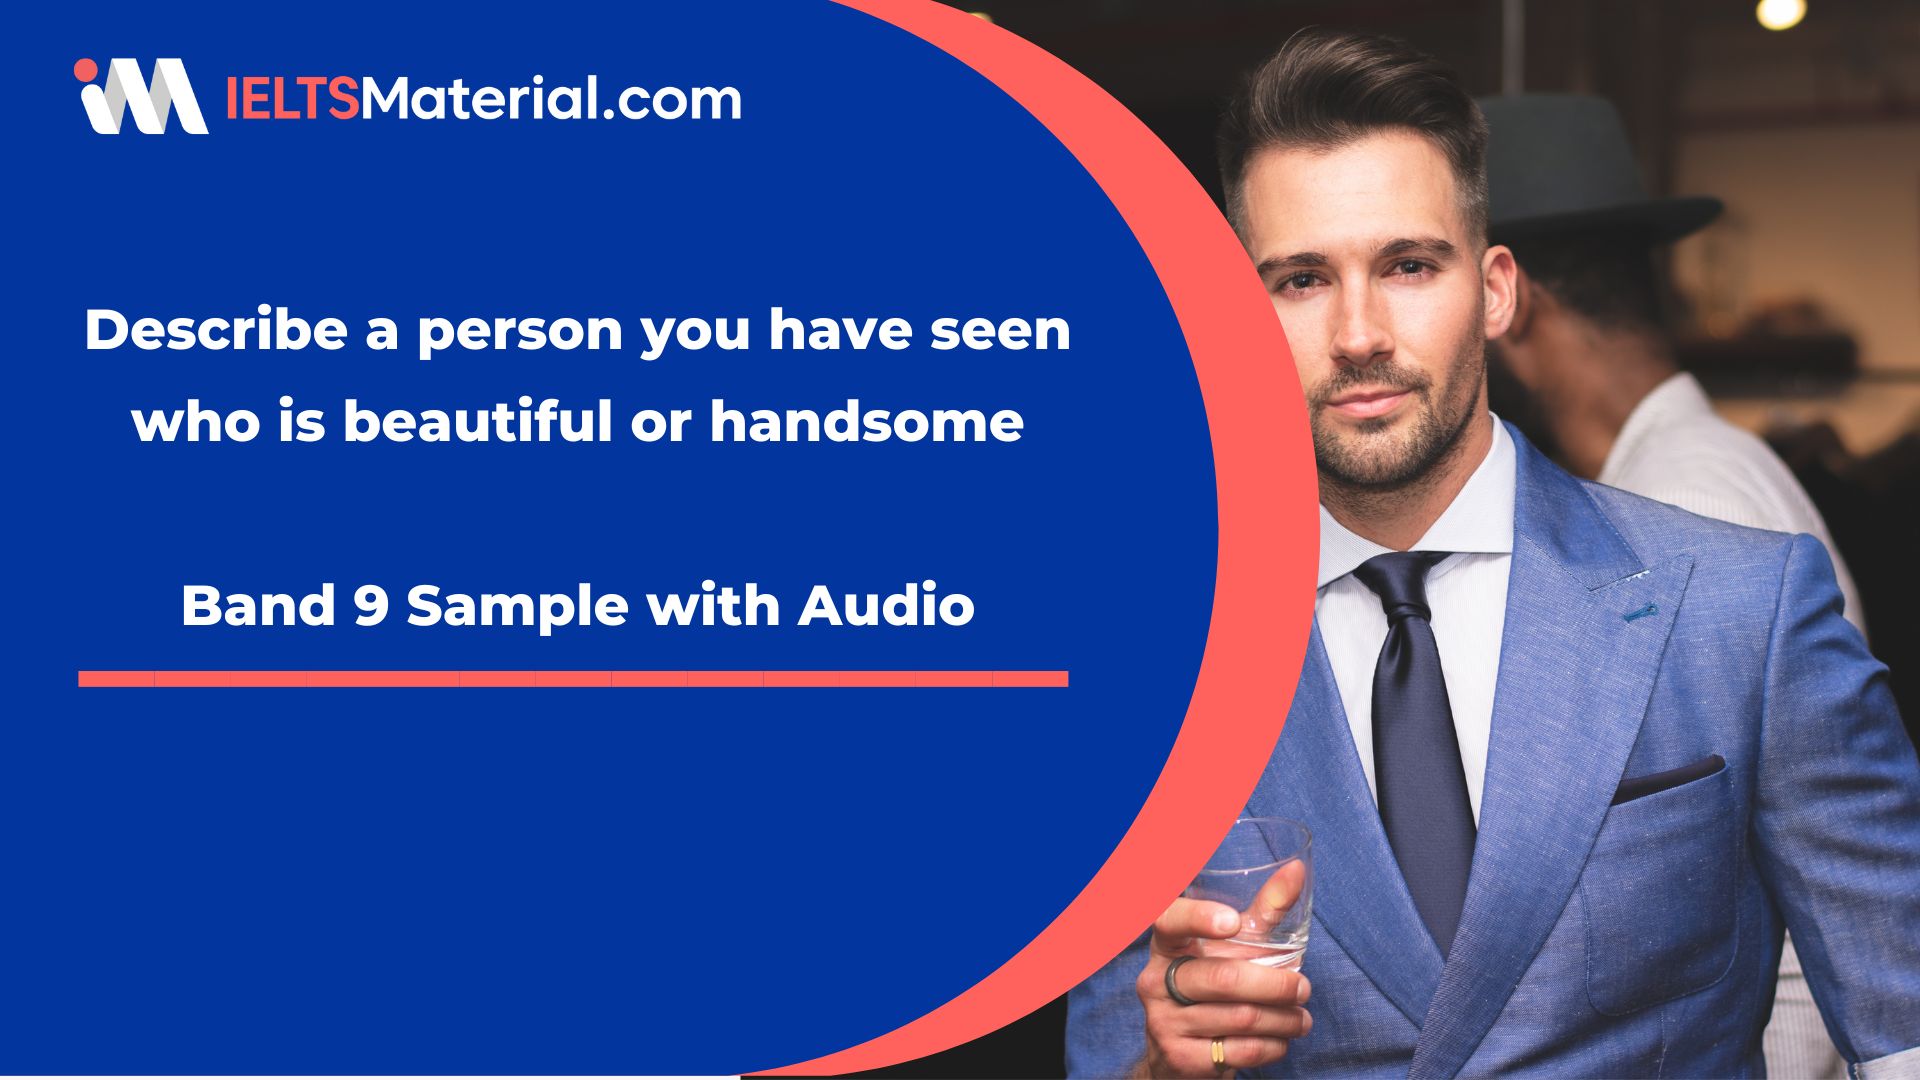 Describe a person you have seen who is beautiful or handsome – Band 9 Sample with Audio